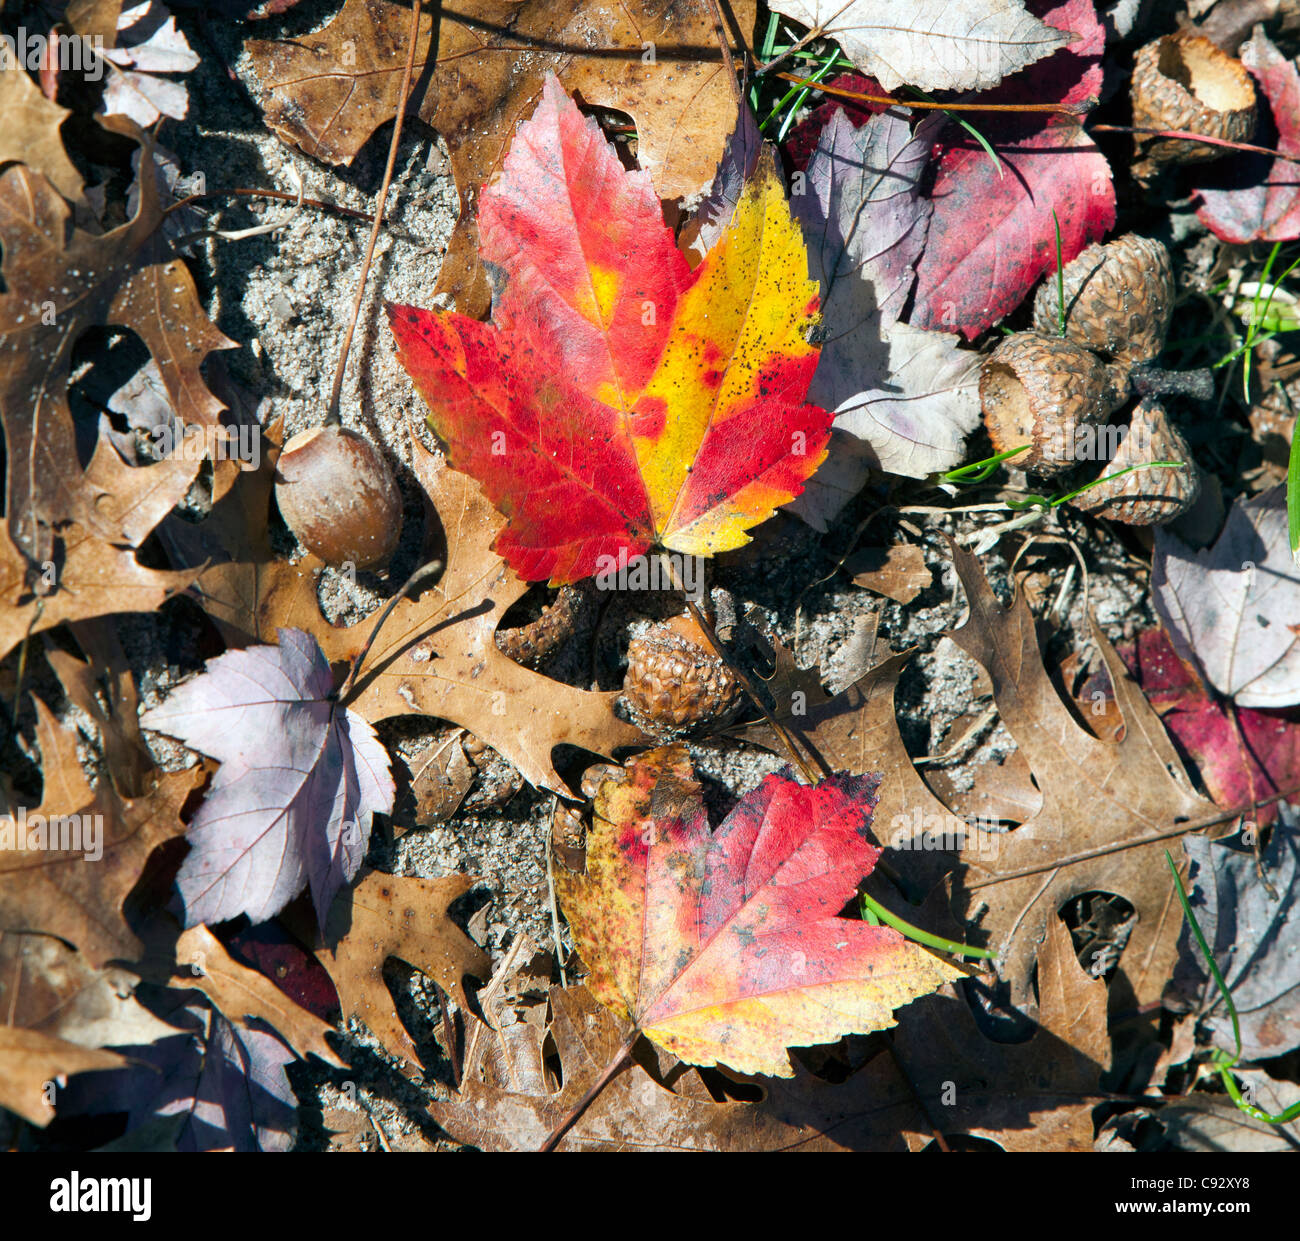 Colorful colourful autumn maple leaves on the ground with acorns. Stock Photo